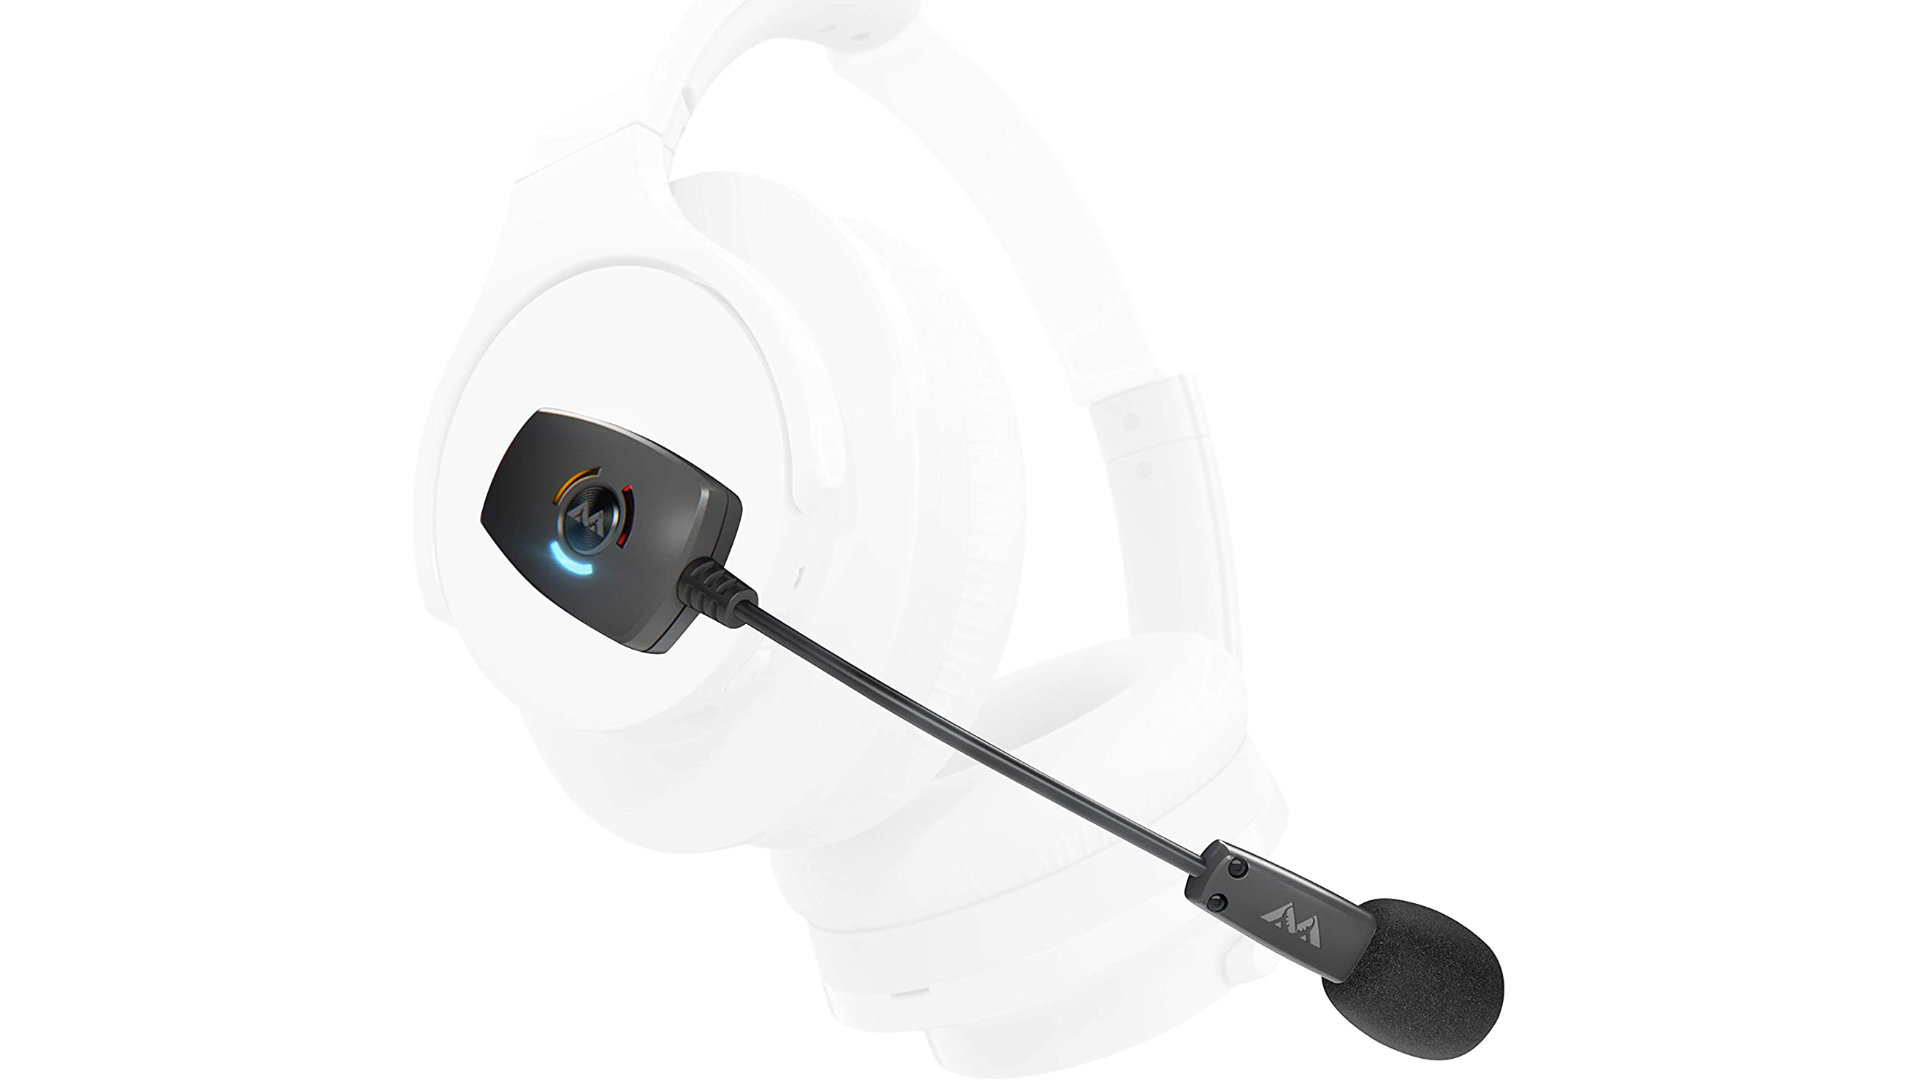 https://www.pcgamesn.com/wp-content/sites/pcgamesn/2023/08/best-gaming-microphone-antlion-modmic-wireless.jpg